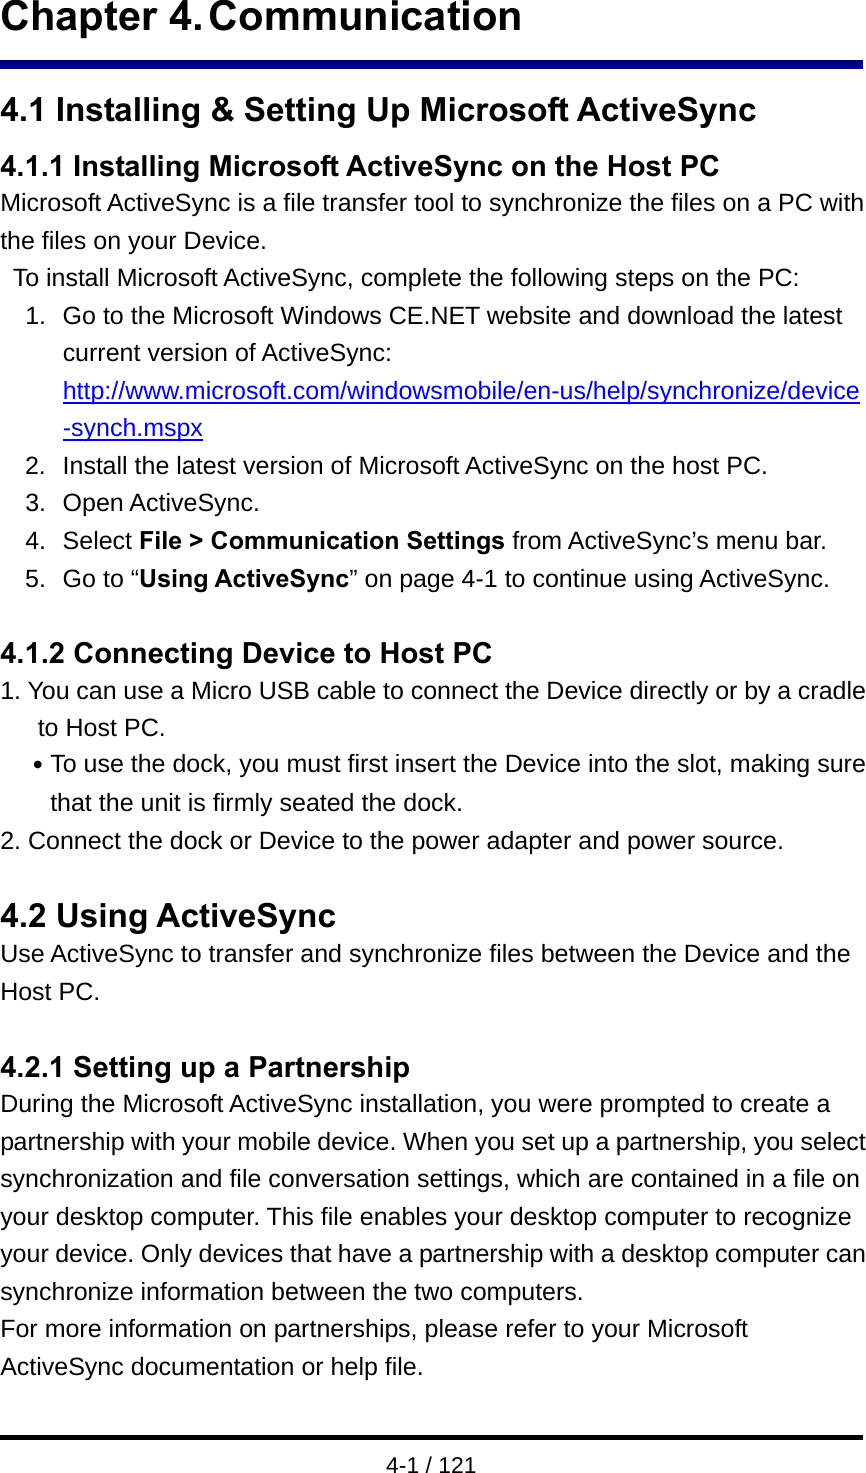  4-1 / 121 Chapter 4. Communication 4.1 Installing &amp; Setting Up Microsoft ActiveSync 4.1.1 Installing Microsoft ActiveSync on the Host PC Microsoft ActiveSync is a file transfer tool to synchronize the files on a PC with the files on your Device.     To install Microsoft ActiveSync, complete the following steps on the PC: 1.  Go to the Microsoft Windows CE.NET website and download the latest current version of ActiveSync: http://www.microsoft.com/windowsmobile/en-us/help/synchronize/device-synch.mspx 2.  Install the latest version of Microsoft ActiveSync on the host PC. 3. Open ActiveSync. 4. Select File &gt; Communication Settings from ActiveSync’s menu bar. 5. Go to “Using ActiveSync” on page 4-1 to continue using ActiveSync.  4.1.2 Connecting Device to Host PC 1. You can use a Micro USB cable to connect the Device directly or by a cradle to Host PC. ․To use the dock, you must first insert the Device into the slot, making sure that the unit is firmly seated the dock. 2. Connect the dock or Device to the power adapter and power source.   4.2 Using ActiveSync Use ActiveSync to transfer and synchronize files between the Device and the Host PC.  4.2.1 Setting up a Partnership During the Microsoft ActiveSync installation, you were prompted to create a partnership with your mobile device. When you set up a partnership, you select synchronization and file conversation settings, which are contained in a file on your desktop computer. This file enables your desktop computer to recognize your device. Only devices that have a partnership with a desktop computer can synchronize information between the two computers. For more information on partnerships, please refer to your Microsoft ActiveSync documentation or help file.    